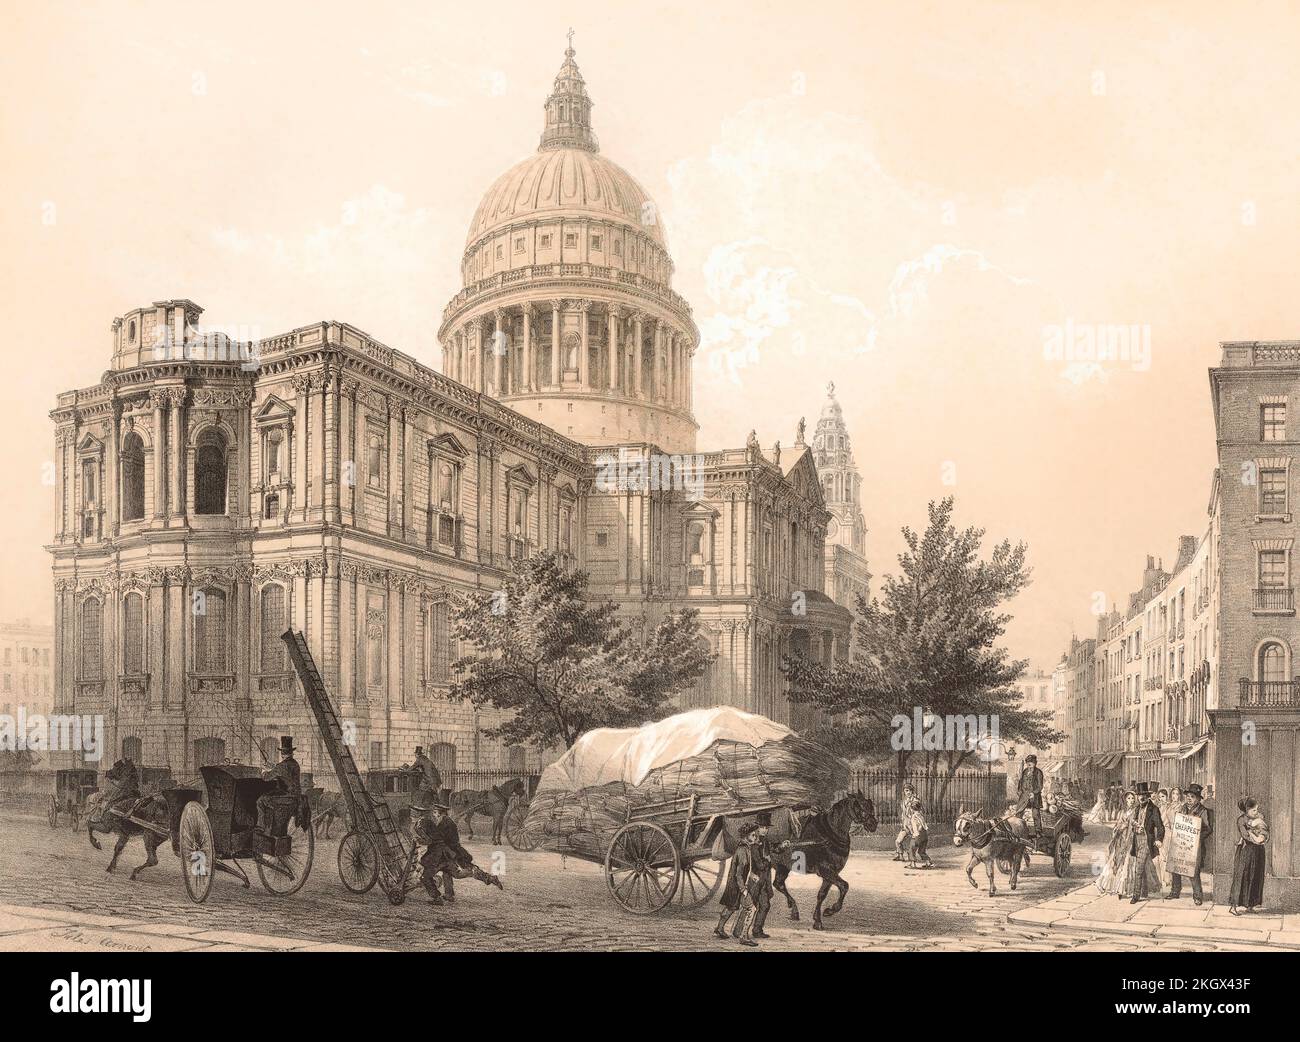 St Pauls Cathedral, London, England, 1855 Stock Photo